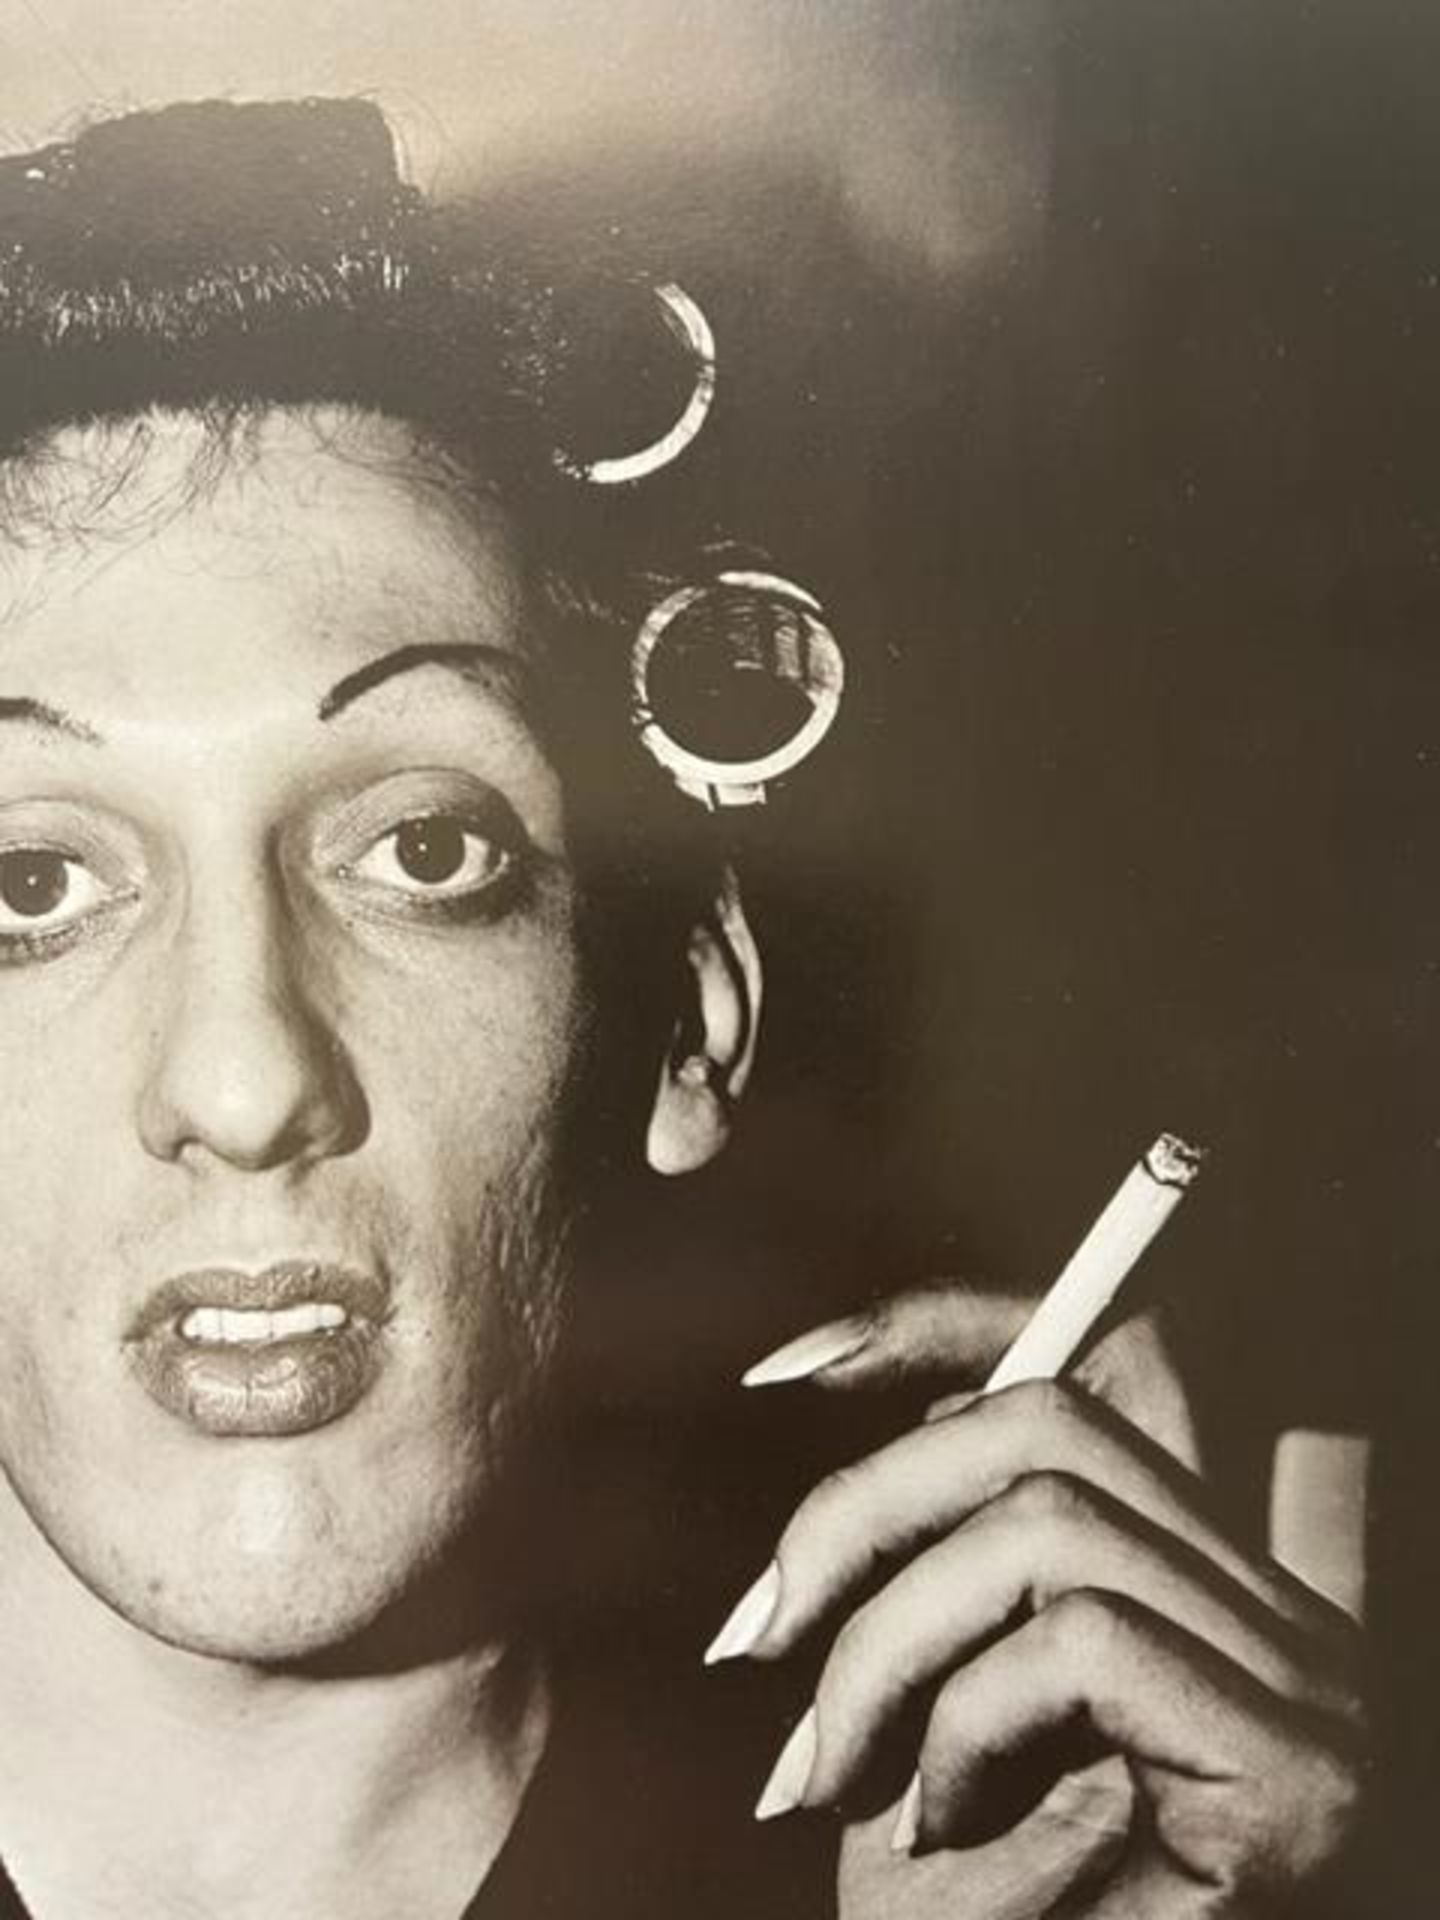 Diane Arbus "Girl with a Cigar" Print. - Image 2 of 6